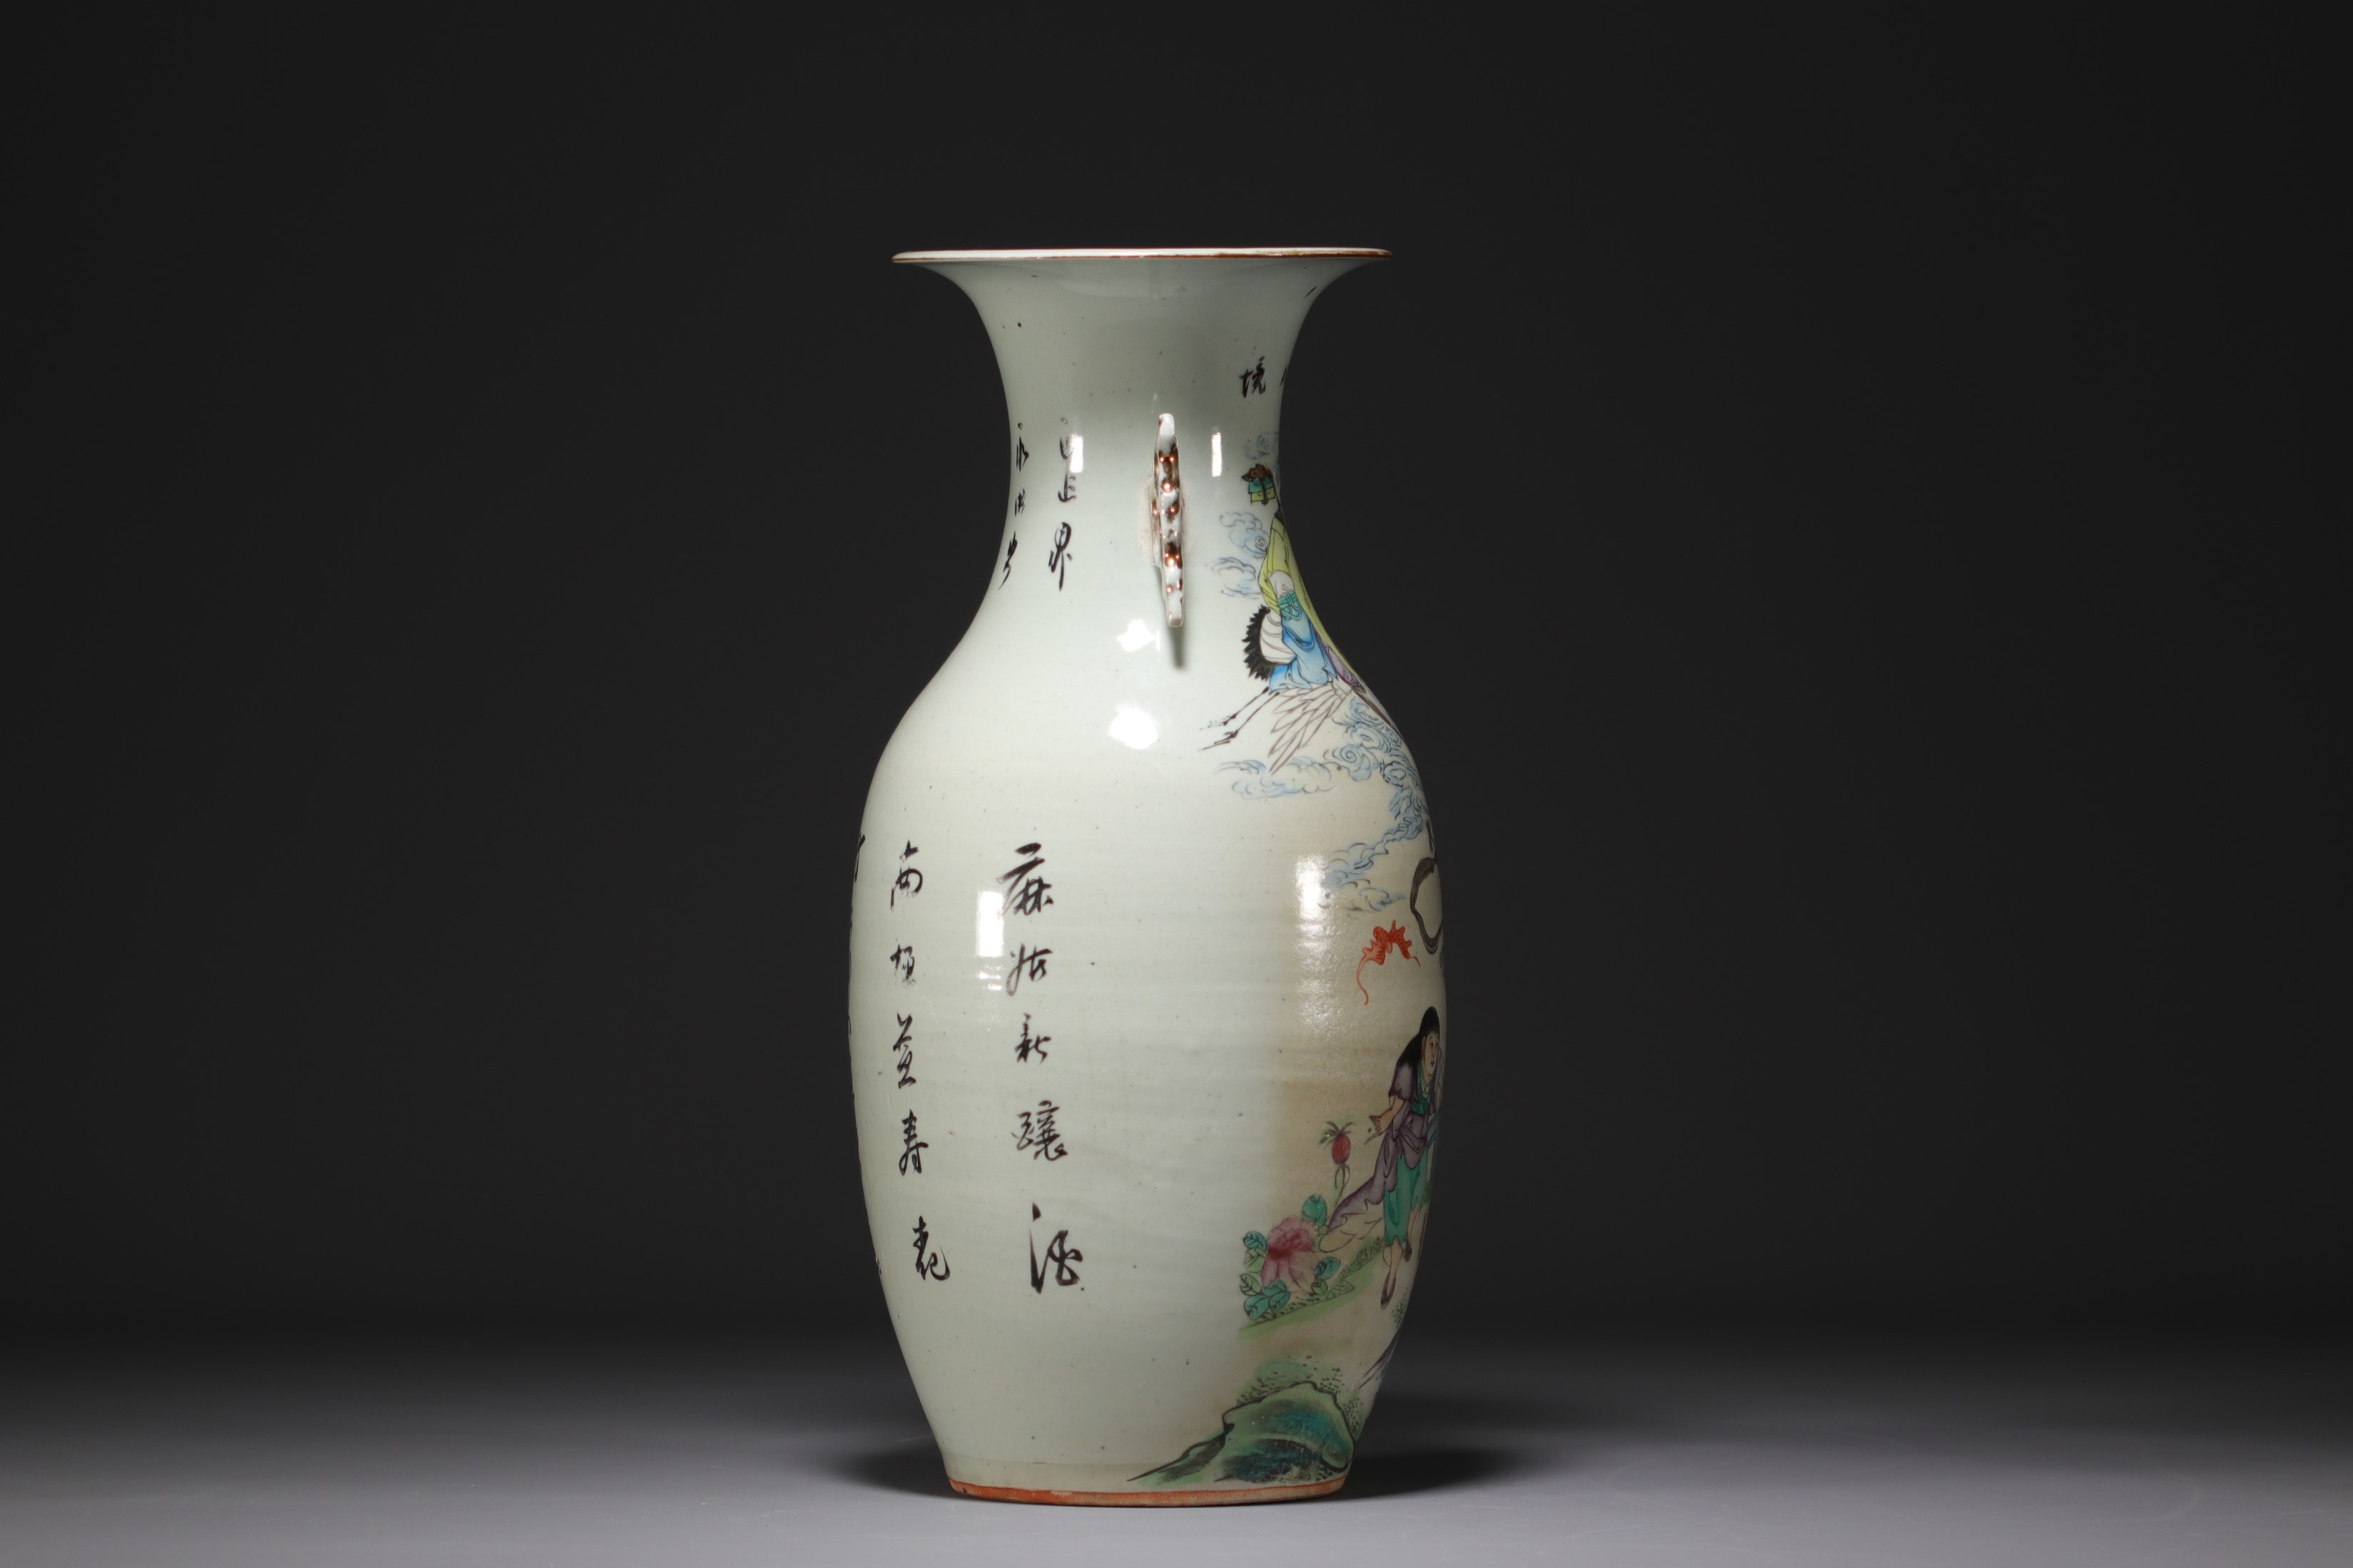 China - Porcelain vase decorated with characters and animals. - Image 3 of 5